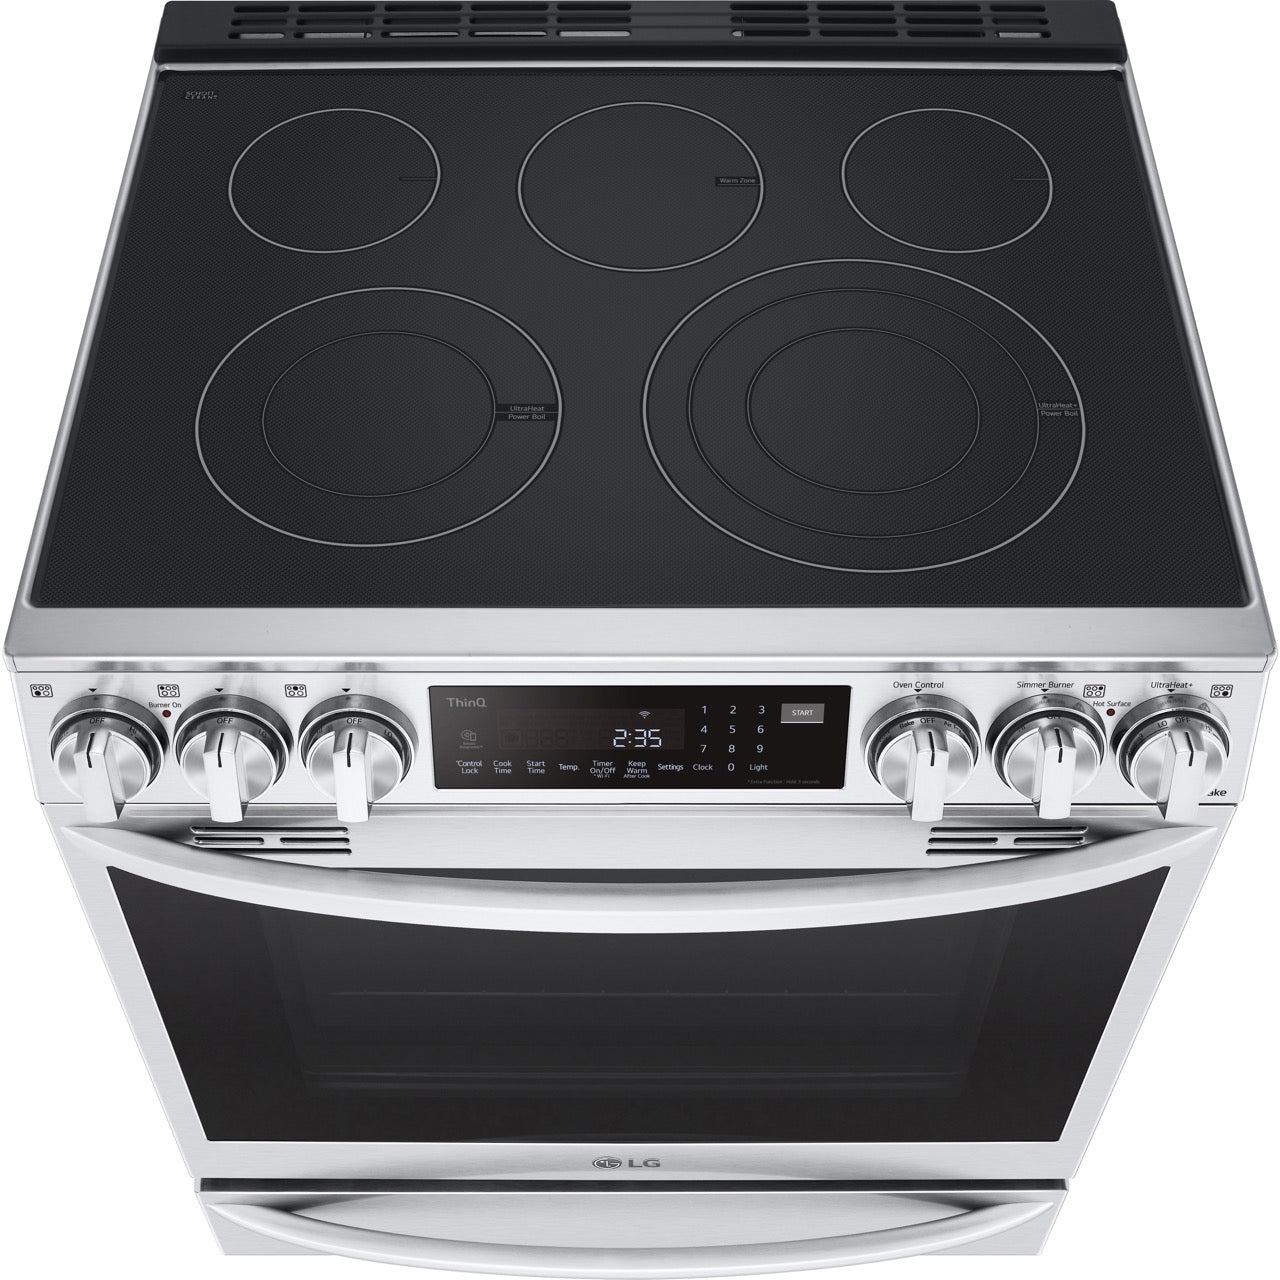 LG 6.3-Cu. Ft. Smart Wi-Fi Enabled ProBake Convection InstaView Electric Slide-in Range with Air Fry, Stainless Steel (LSEL6337F)